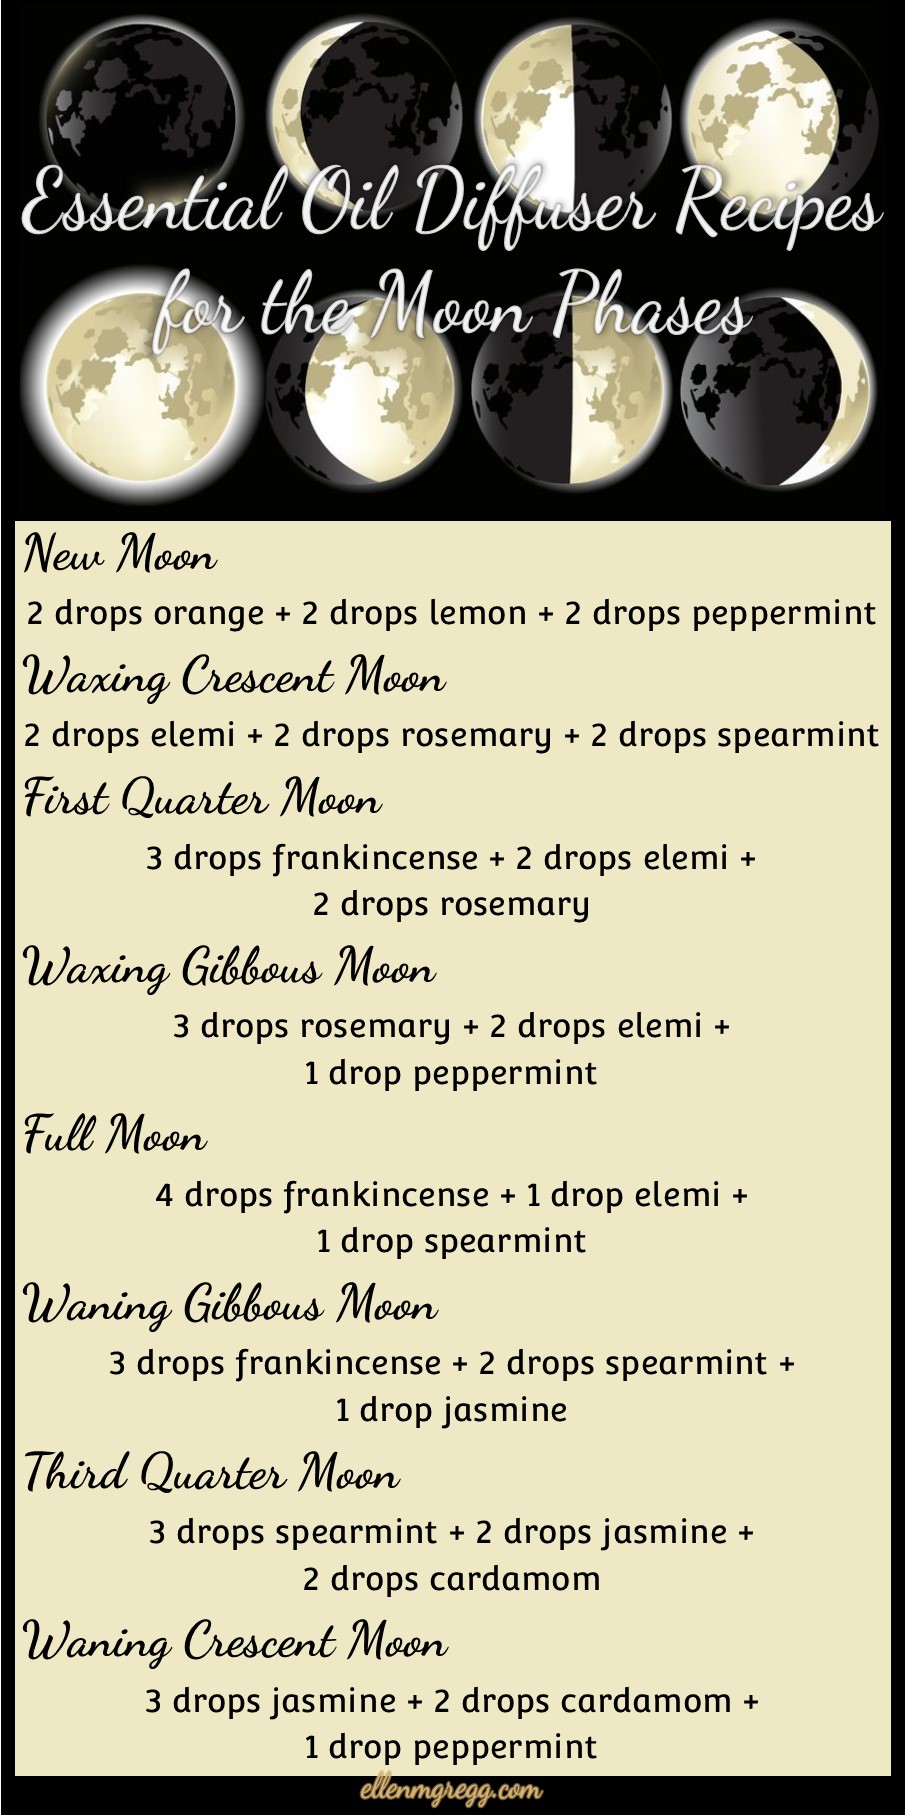 Essential Oil Diffuser Blends for the Moon Phases ~ Intuitive Ellen